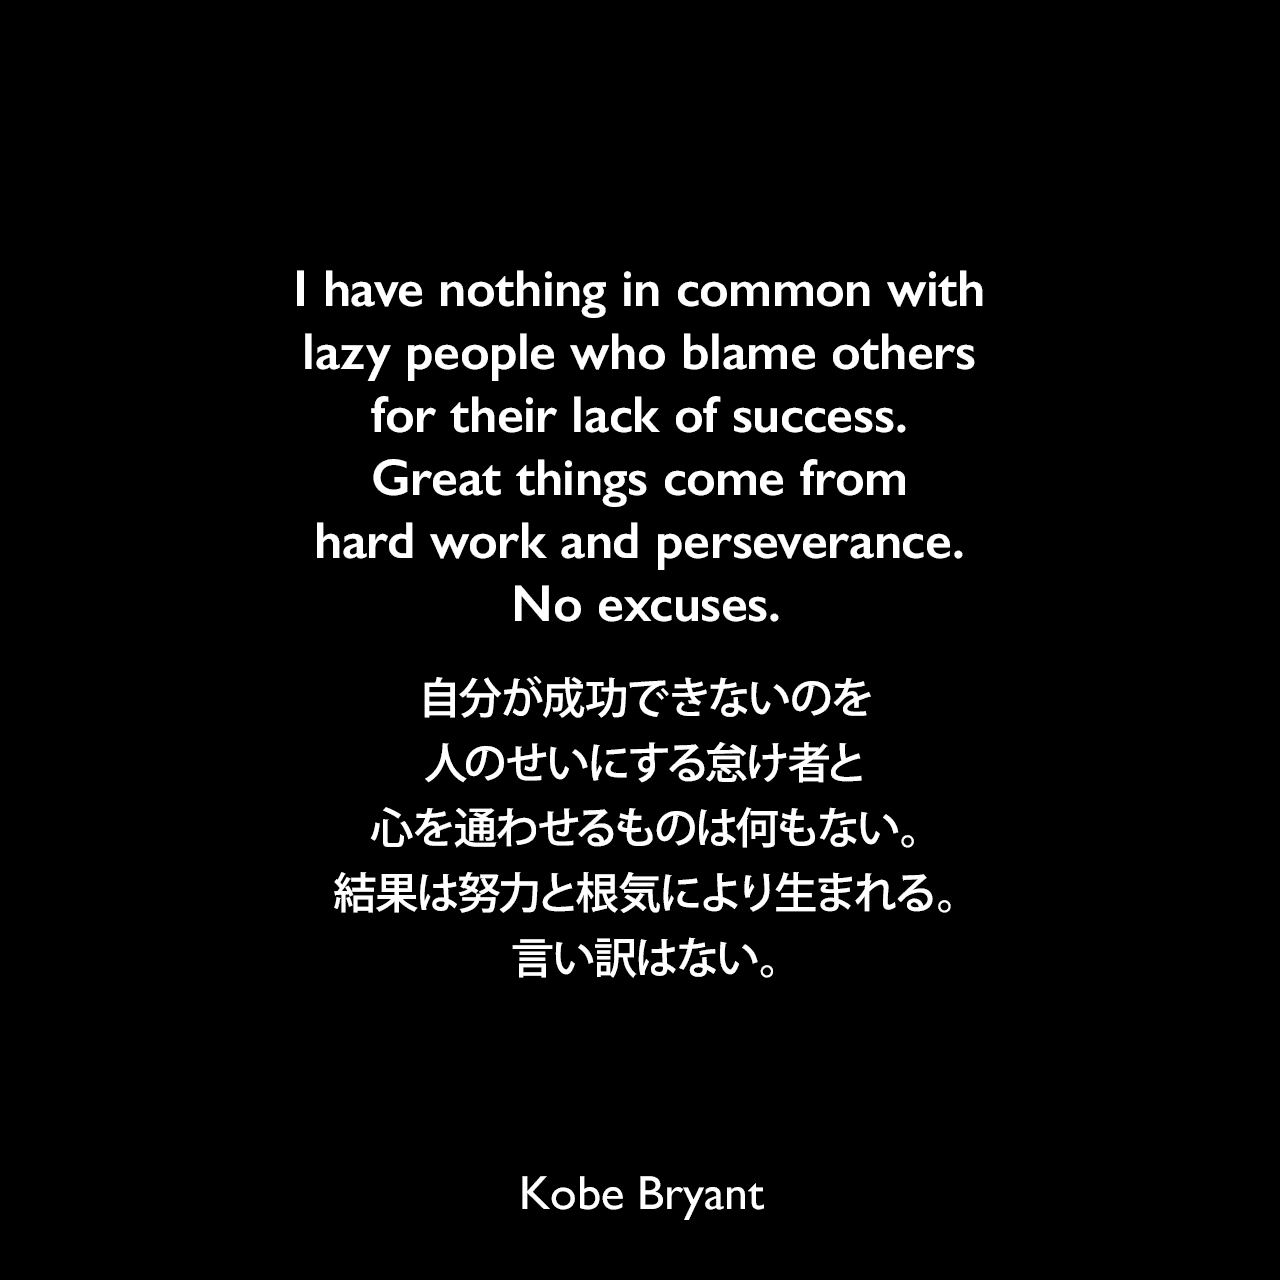 I have nothing in common with lazy people who blame others for their lack of success. Great things come from hard work and perseverance. No excuses.自分が成功できないのを人のせいにする怠け者と心を通わせるものは何もない。結果は努力と根気により生まれる。言い訳はない。Kobe Bryant